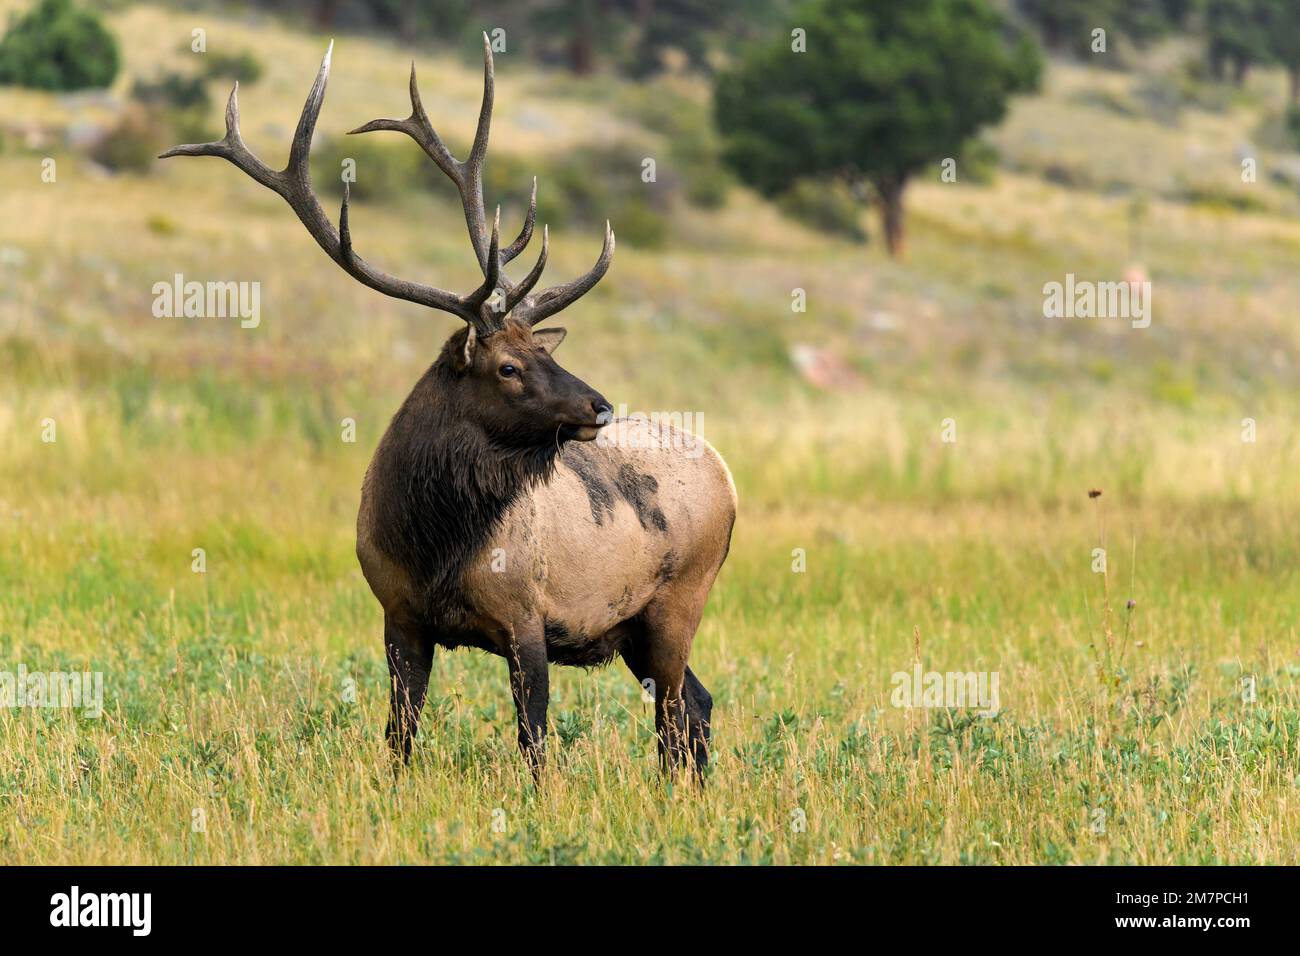 Bull Elk - Close-up view of a strong mature bull elk standing and grazing in a mountain meadow on a late Summer evening. Rocky Mountain National Park. Stock Photo